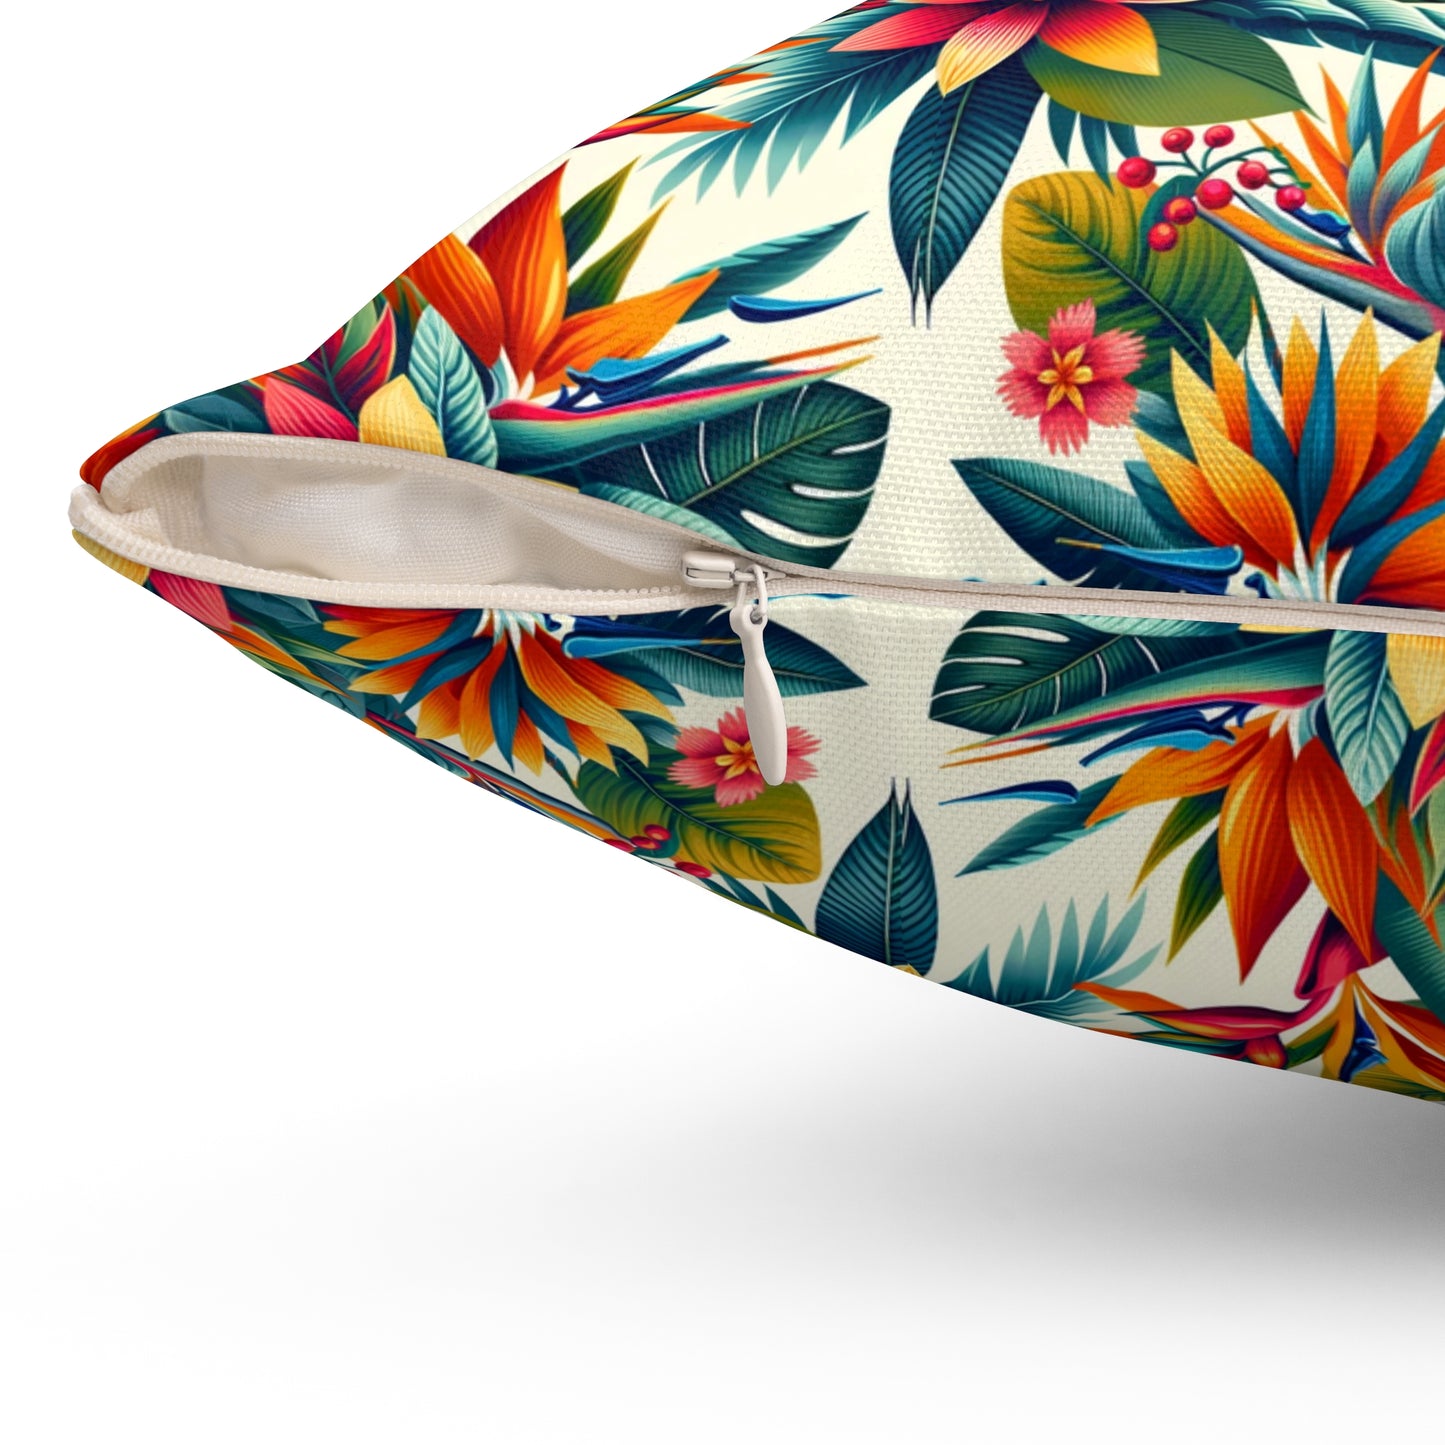 Tropical Paradise: Lush Floral and Foliage Pillow Design